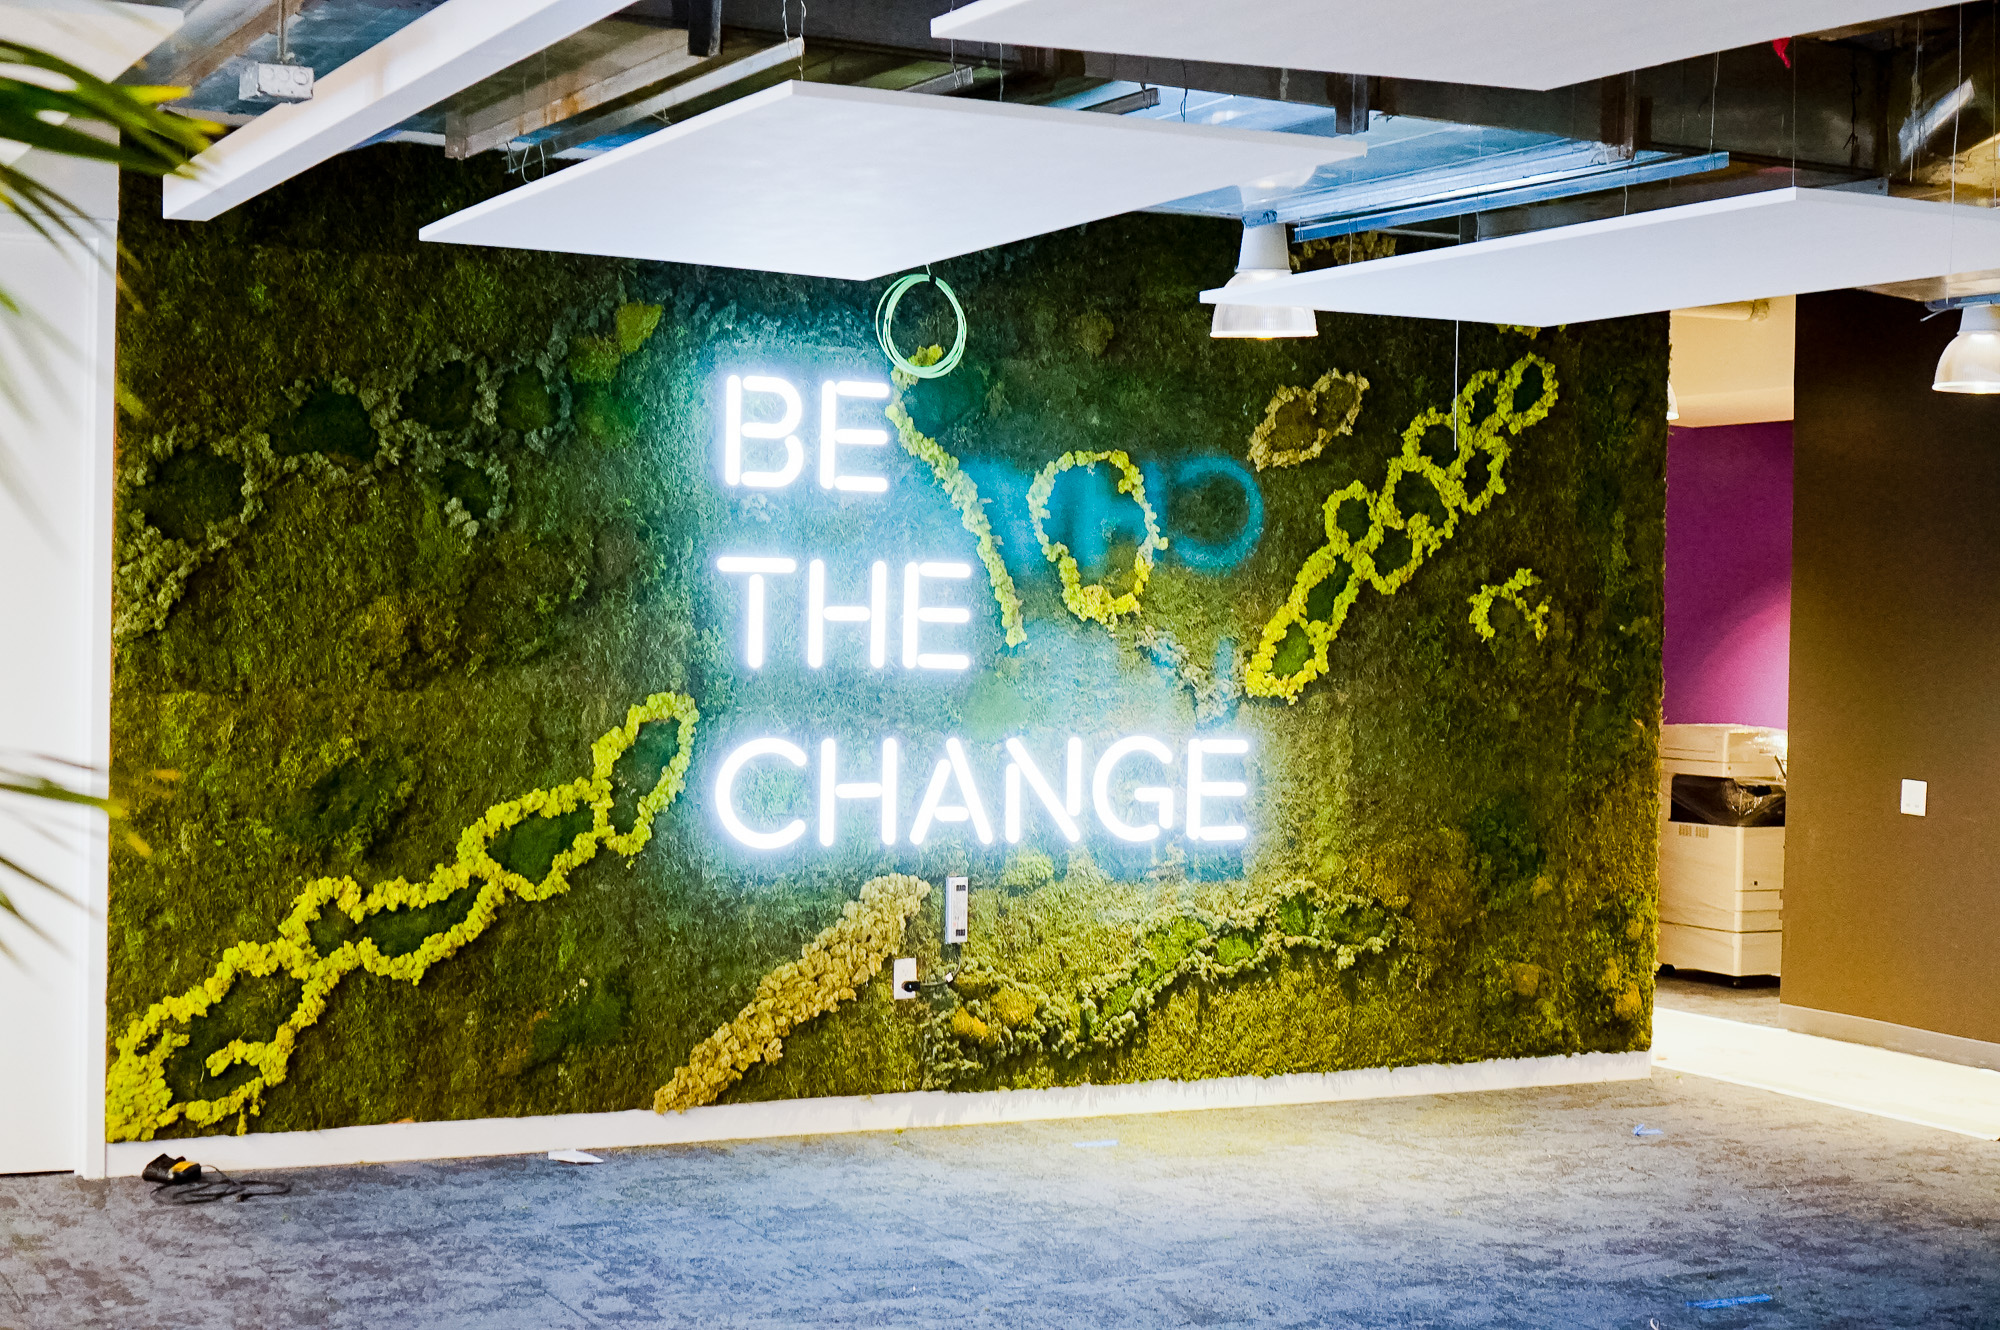 Neon-style, motivational "be the change" sign on a large moss / living wall for Scale, a San Francisco based company delivering high quality training data for AI applications such as self-driving cars, mapping, AR/VR, robotics, and more.